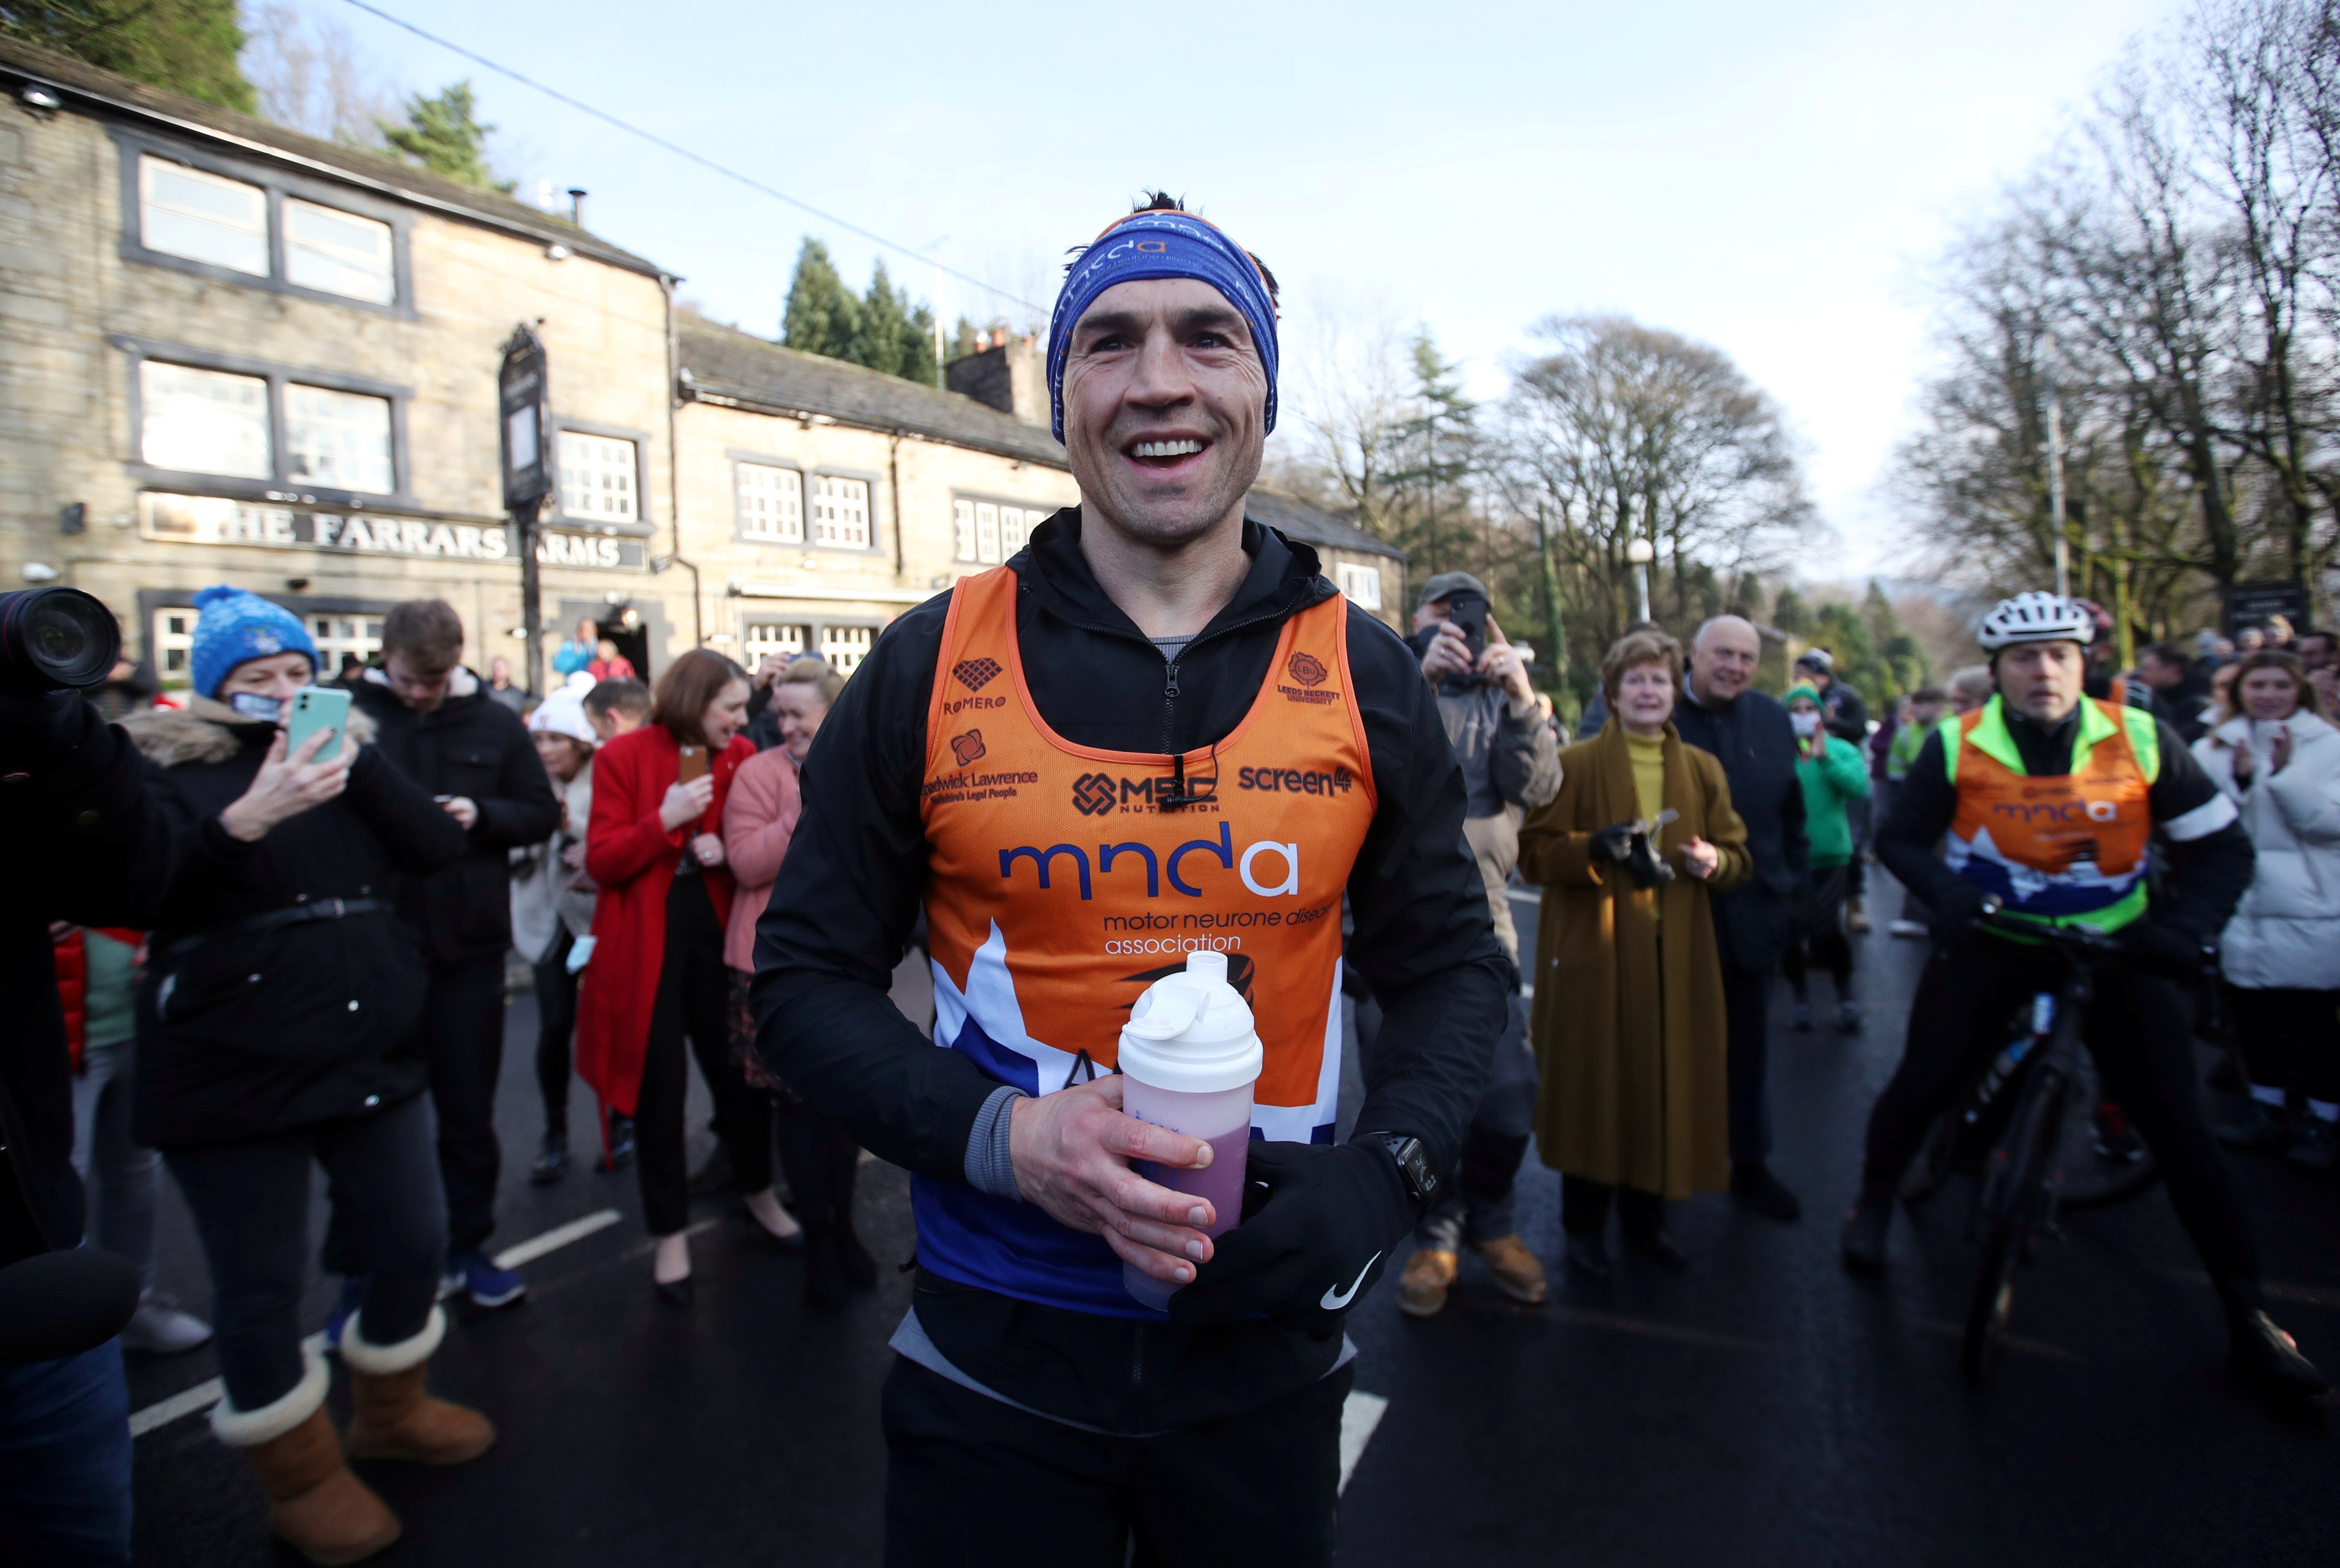 Sinfield completed the incredible feat to raise money for MND research